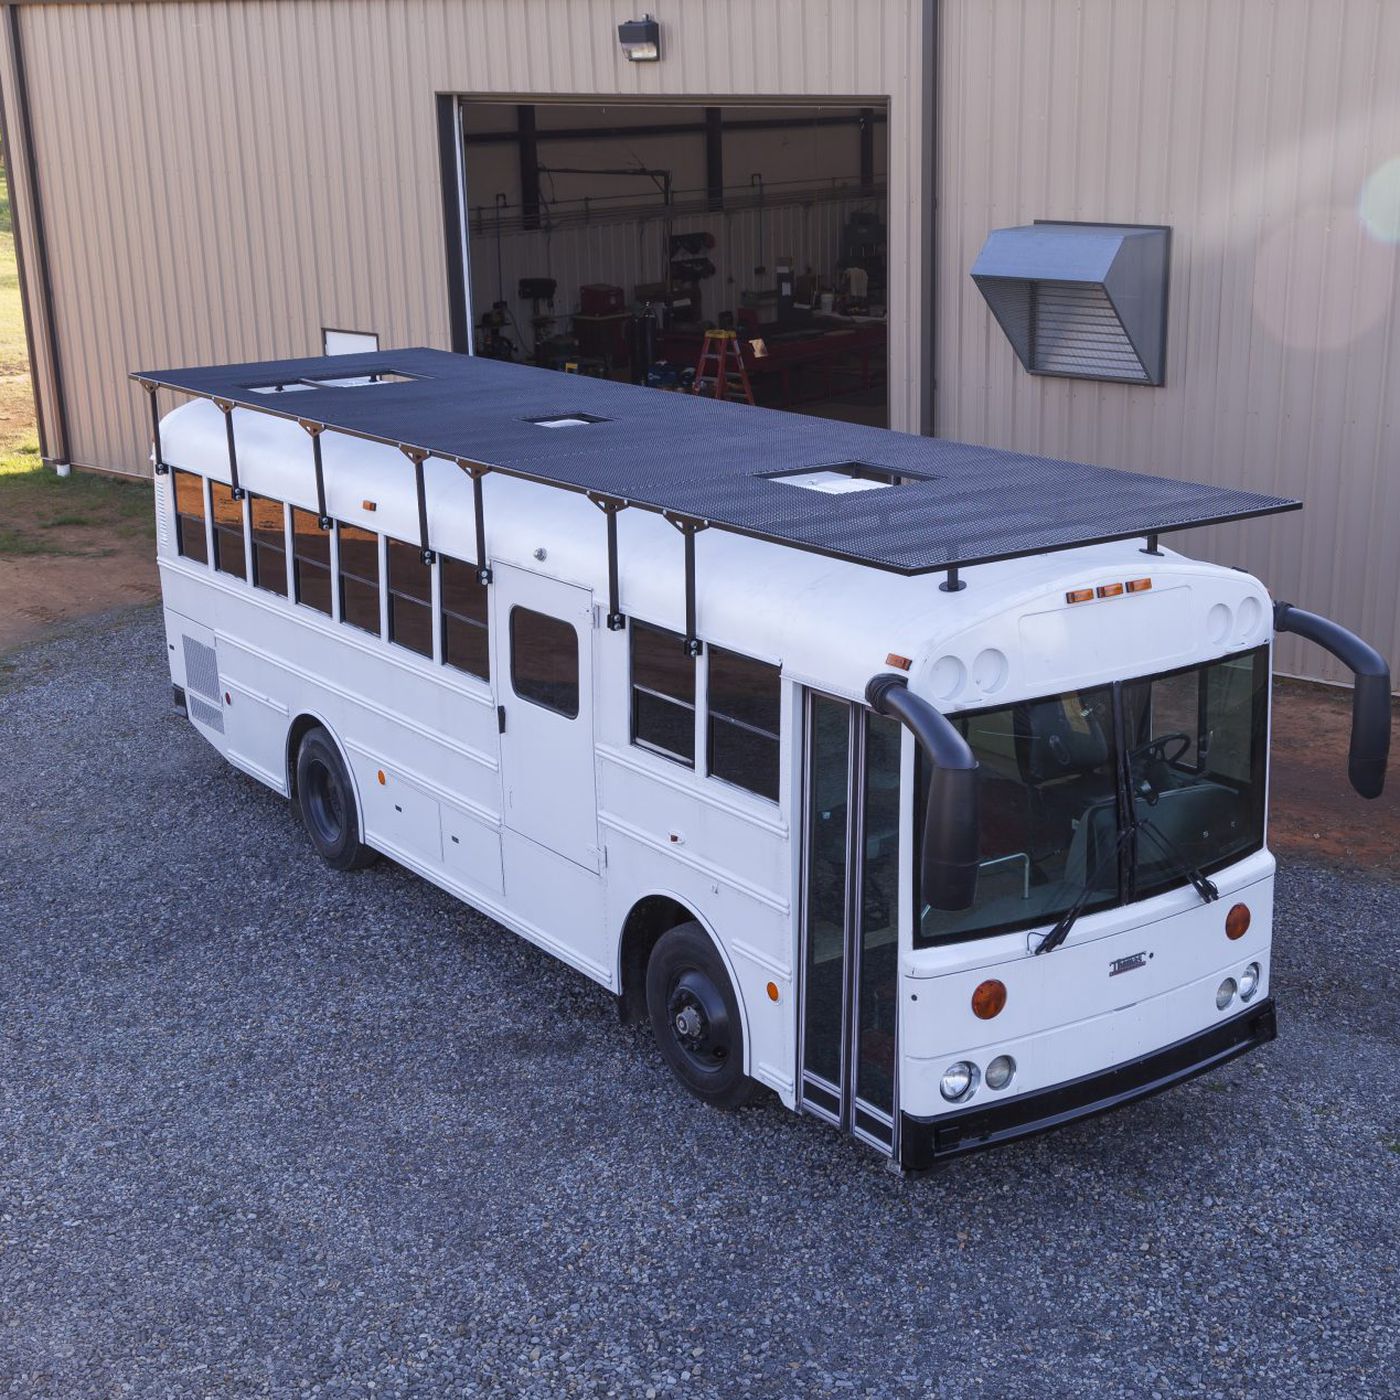 Solar Powered School Bus Home Makes A Modern Mobile Home Curbed,Eggplant Recipes